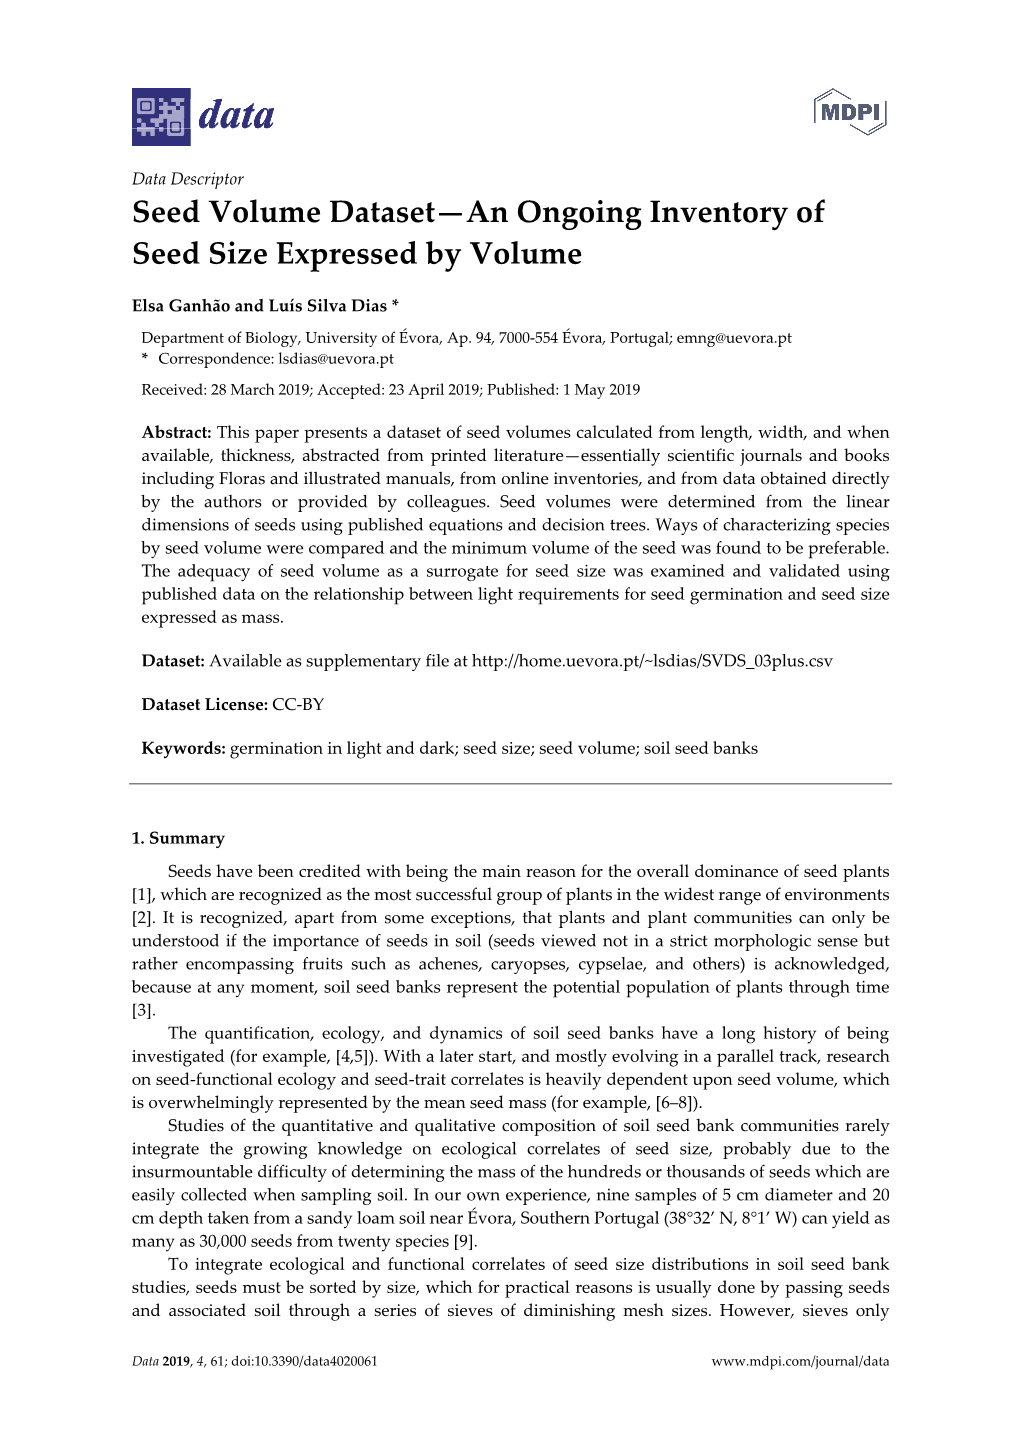 Seed Volume Dataset—An Ongoing Inventory of Seed Size Expressed by Volume